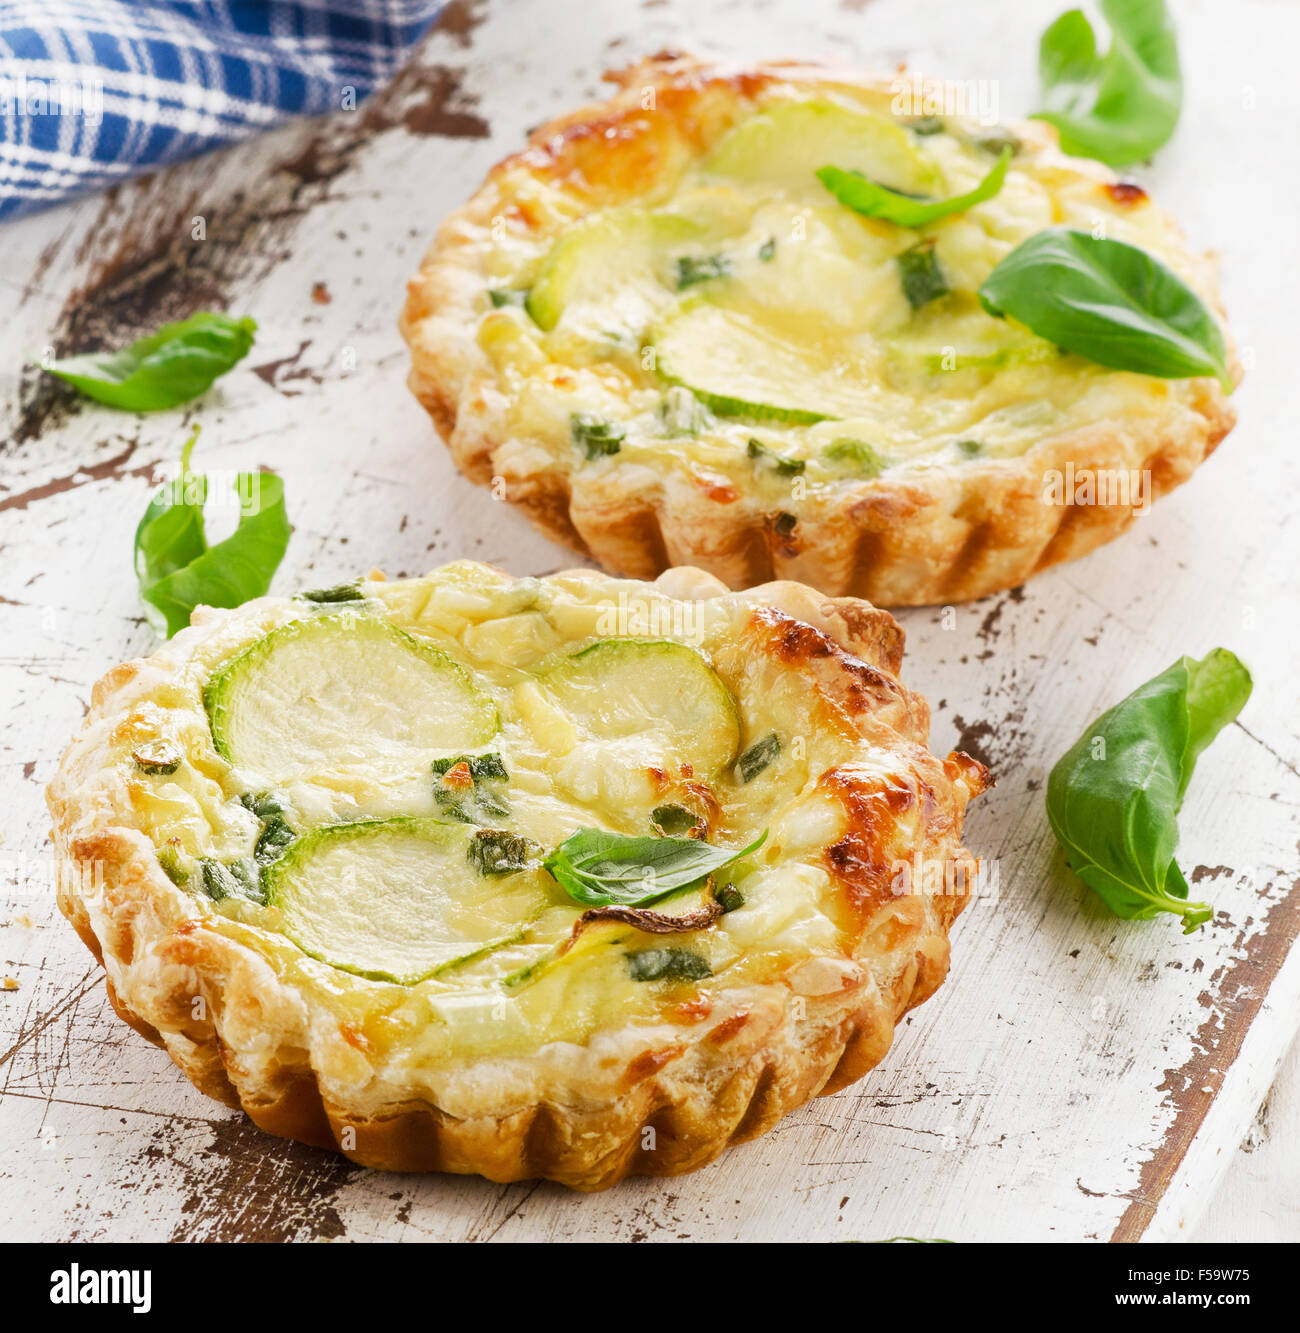 Tart with cheese on a wooden table. Selective focus Stock Photo